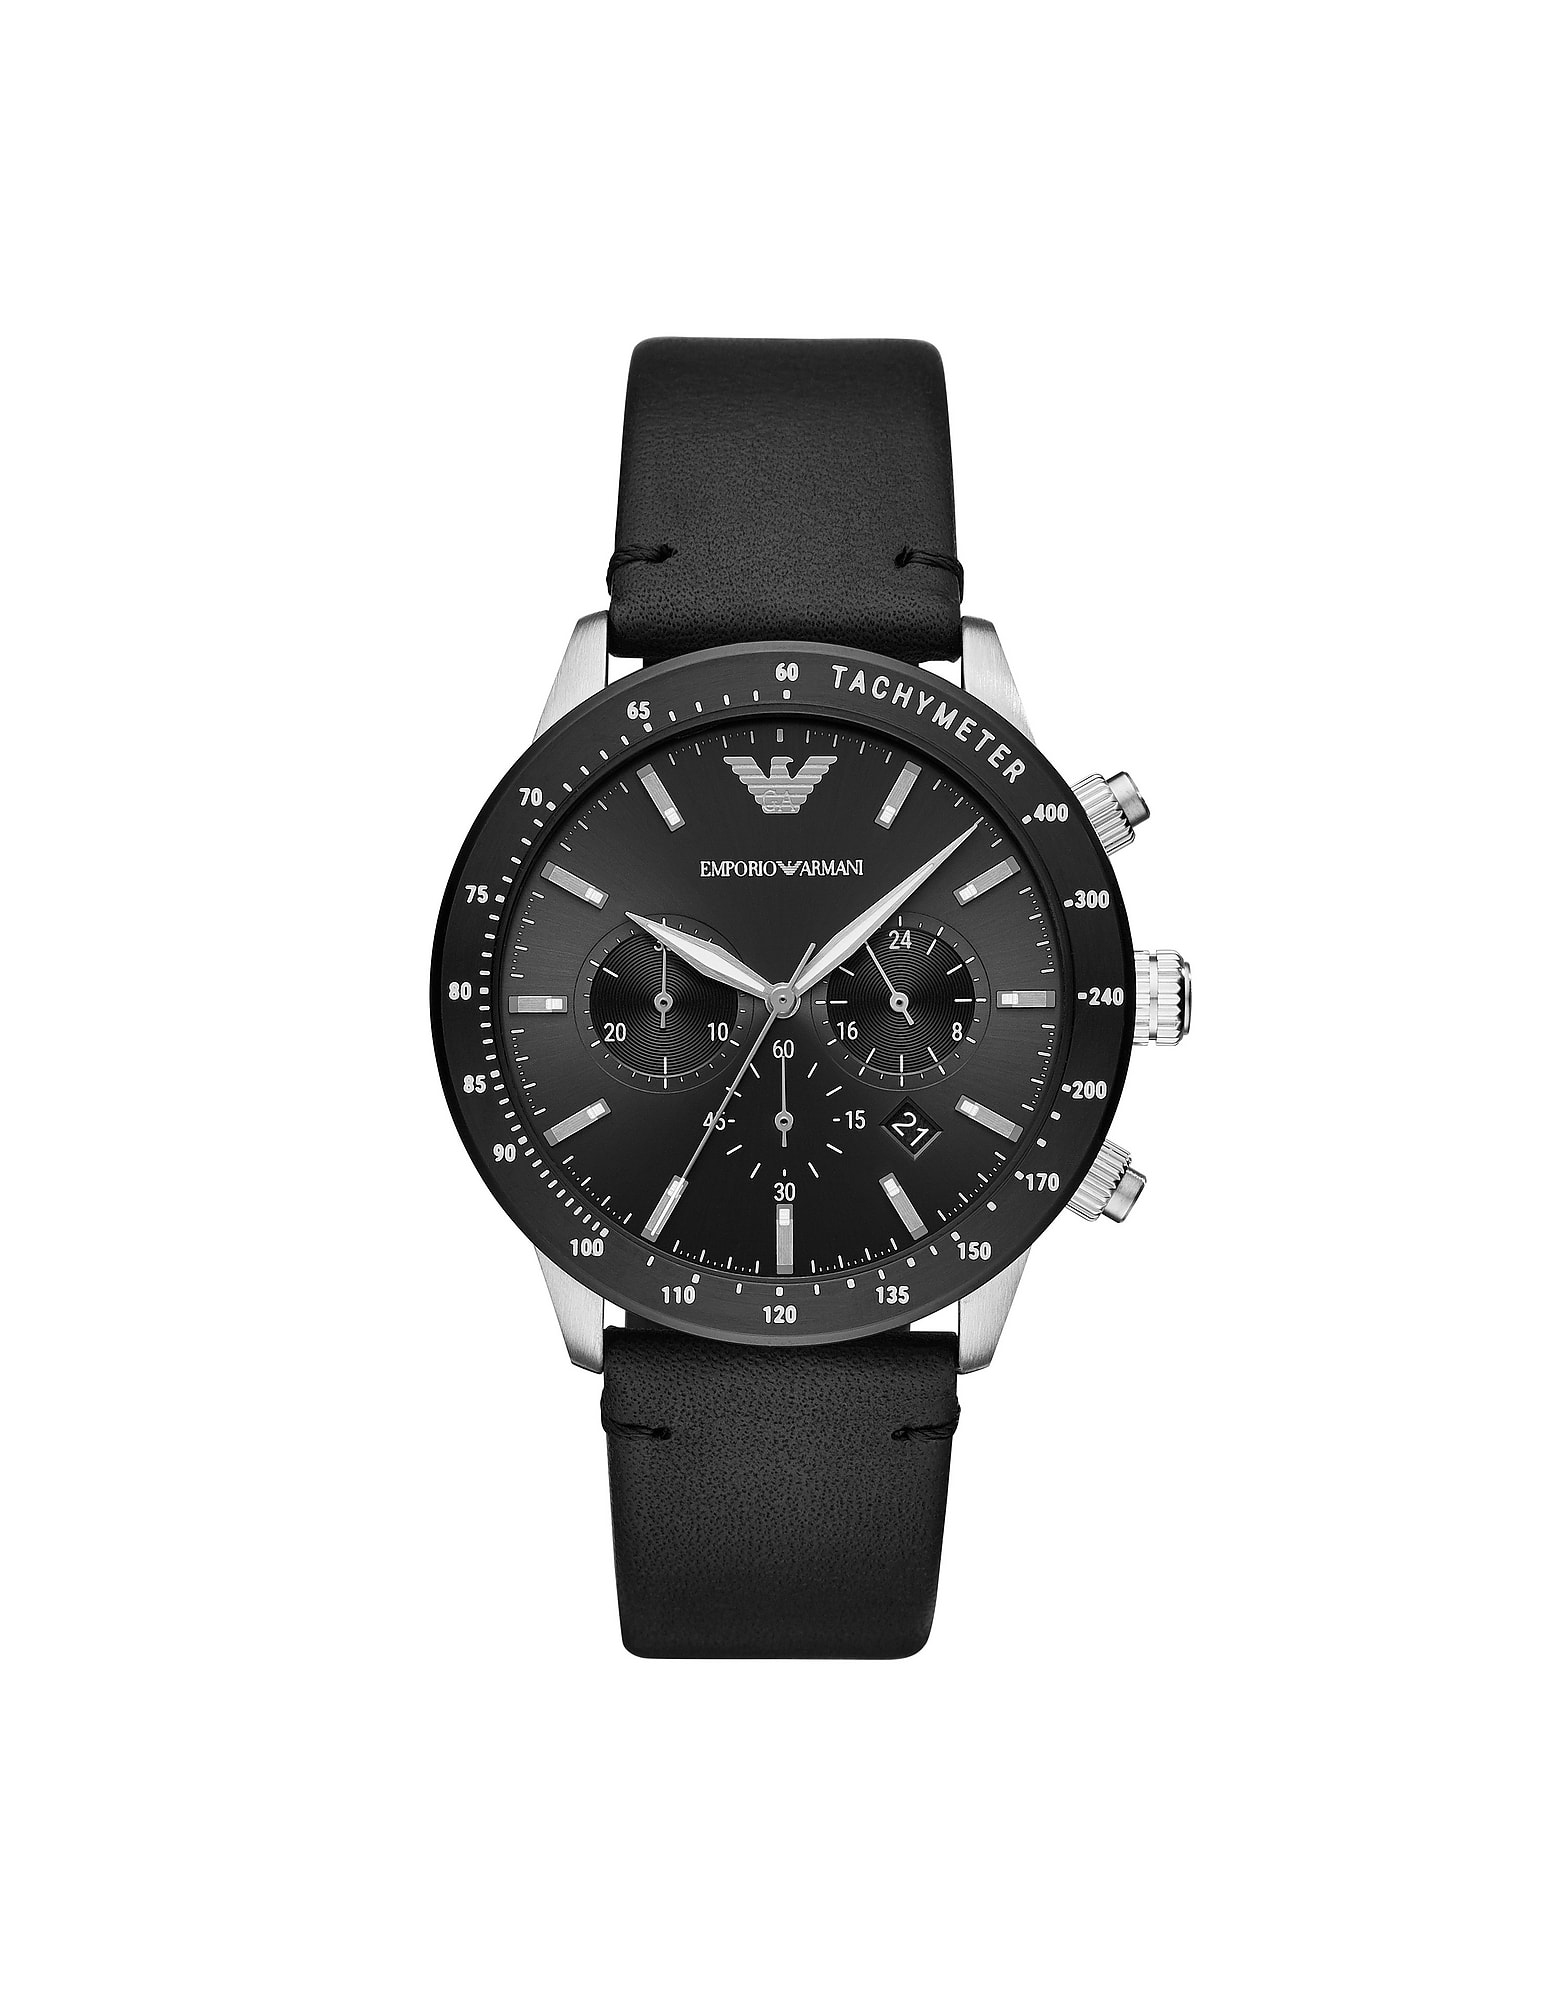 EMPORIO ARMANI STAINLESS STEEL MENS WATCH,AR11243